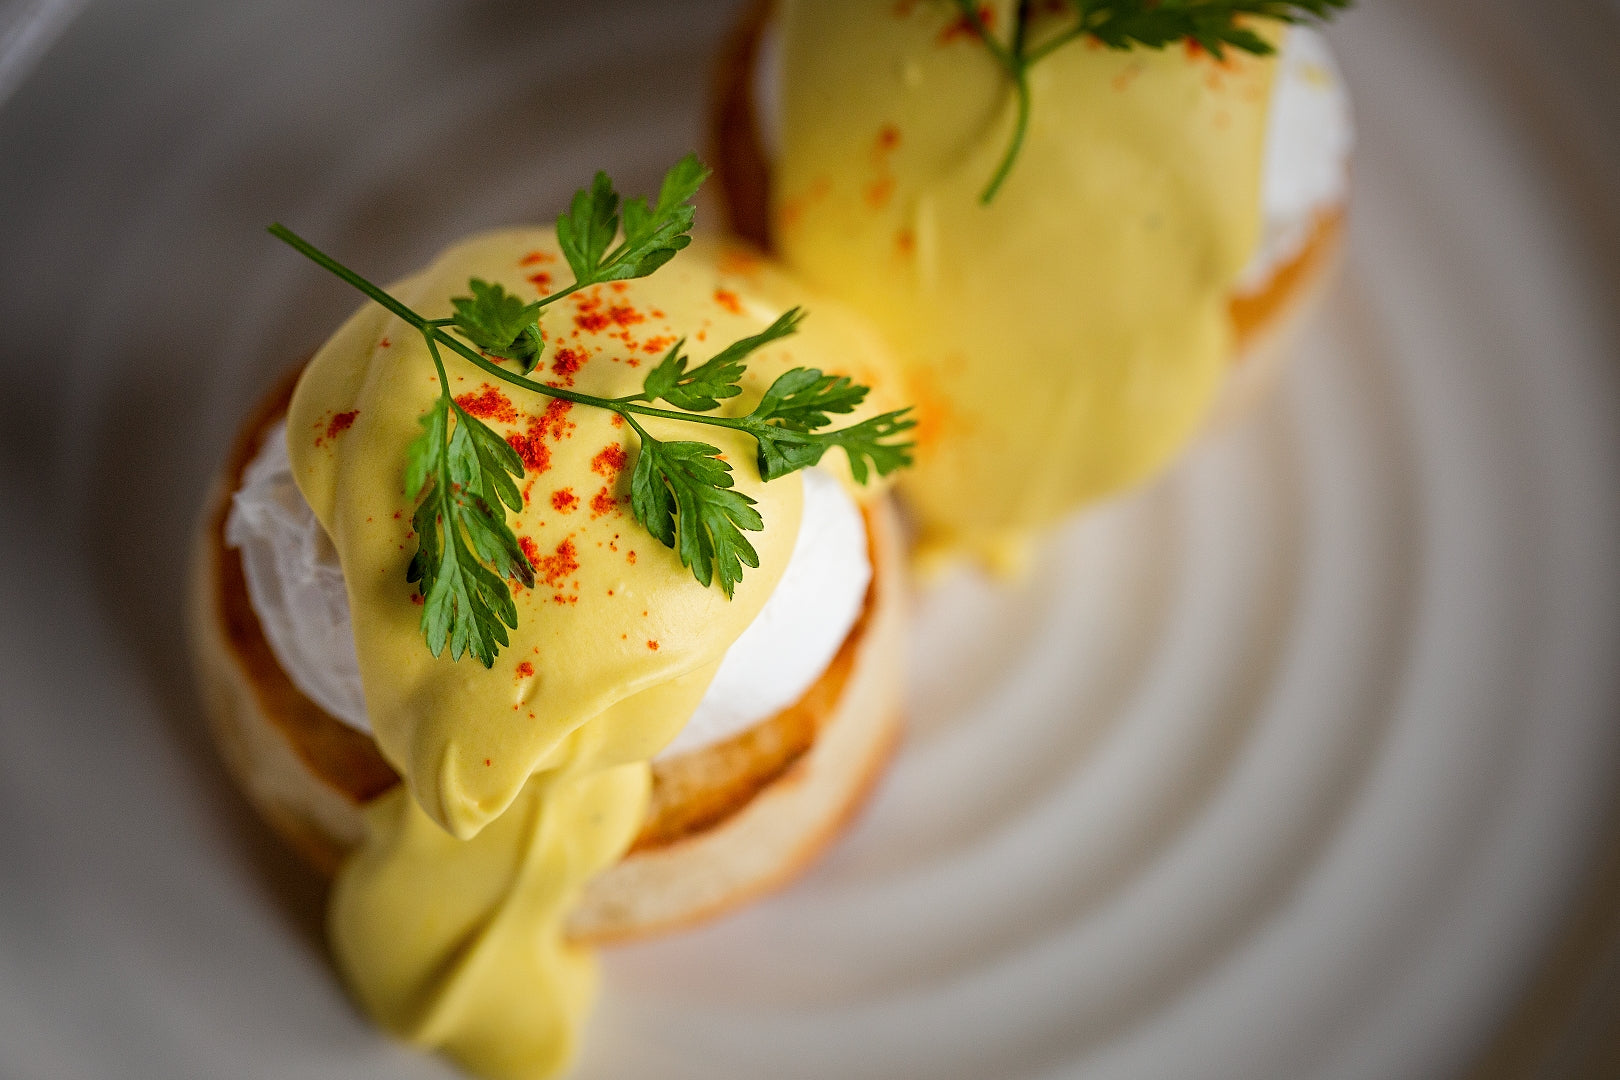 POACHED EGGS WITH HOLLANDAISE SAUCE ON MUFFINS